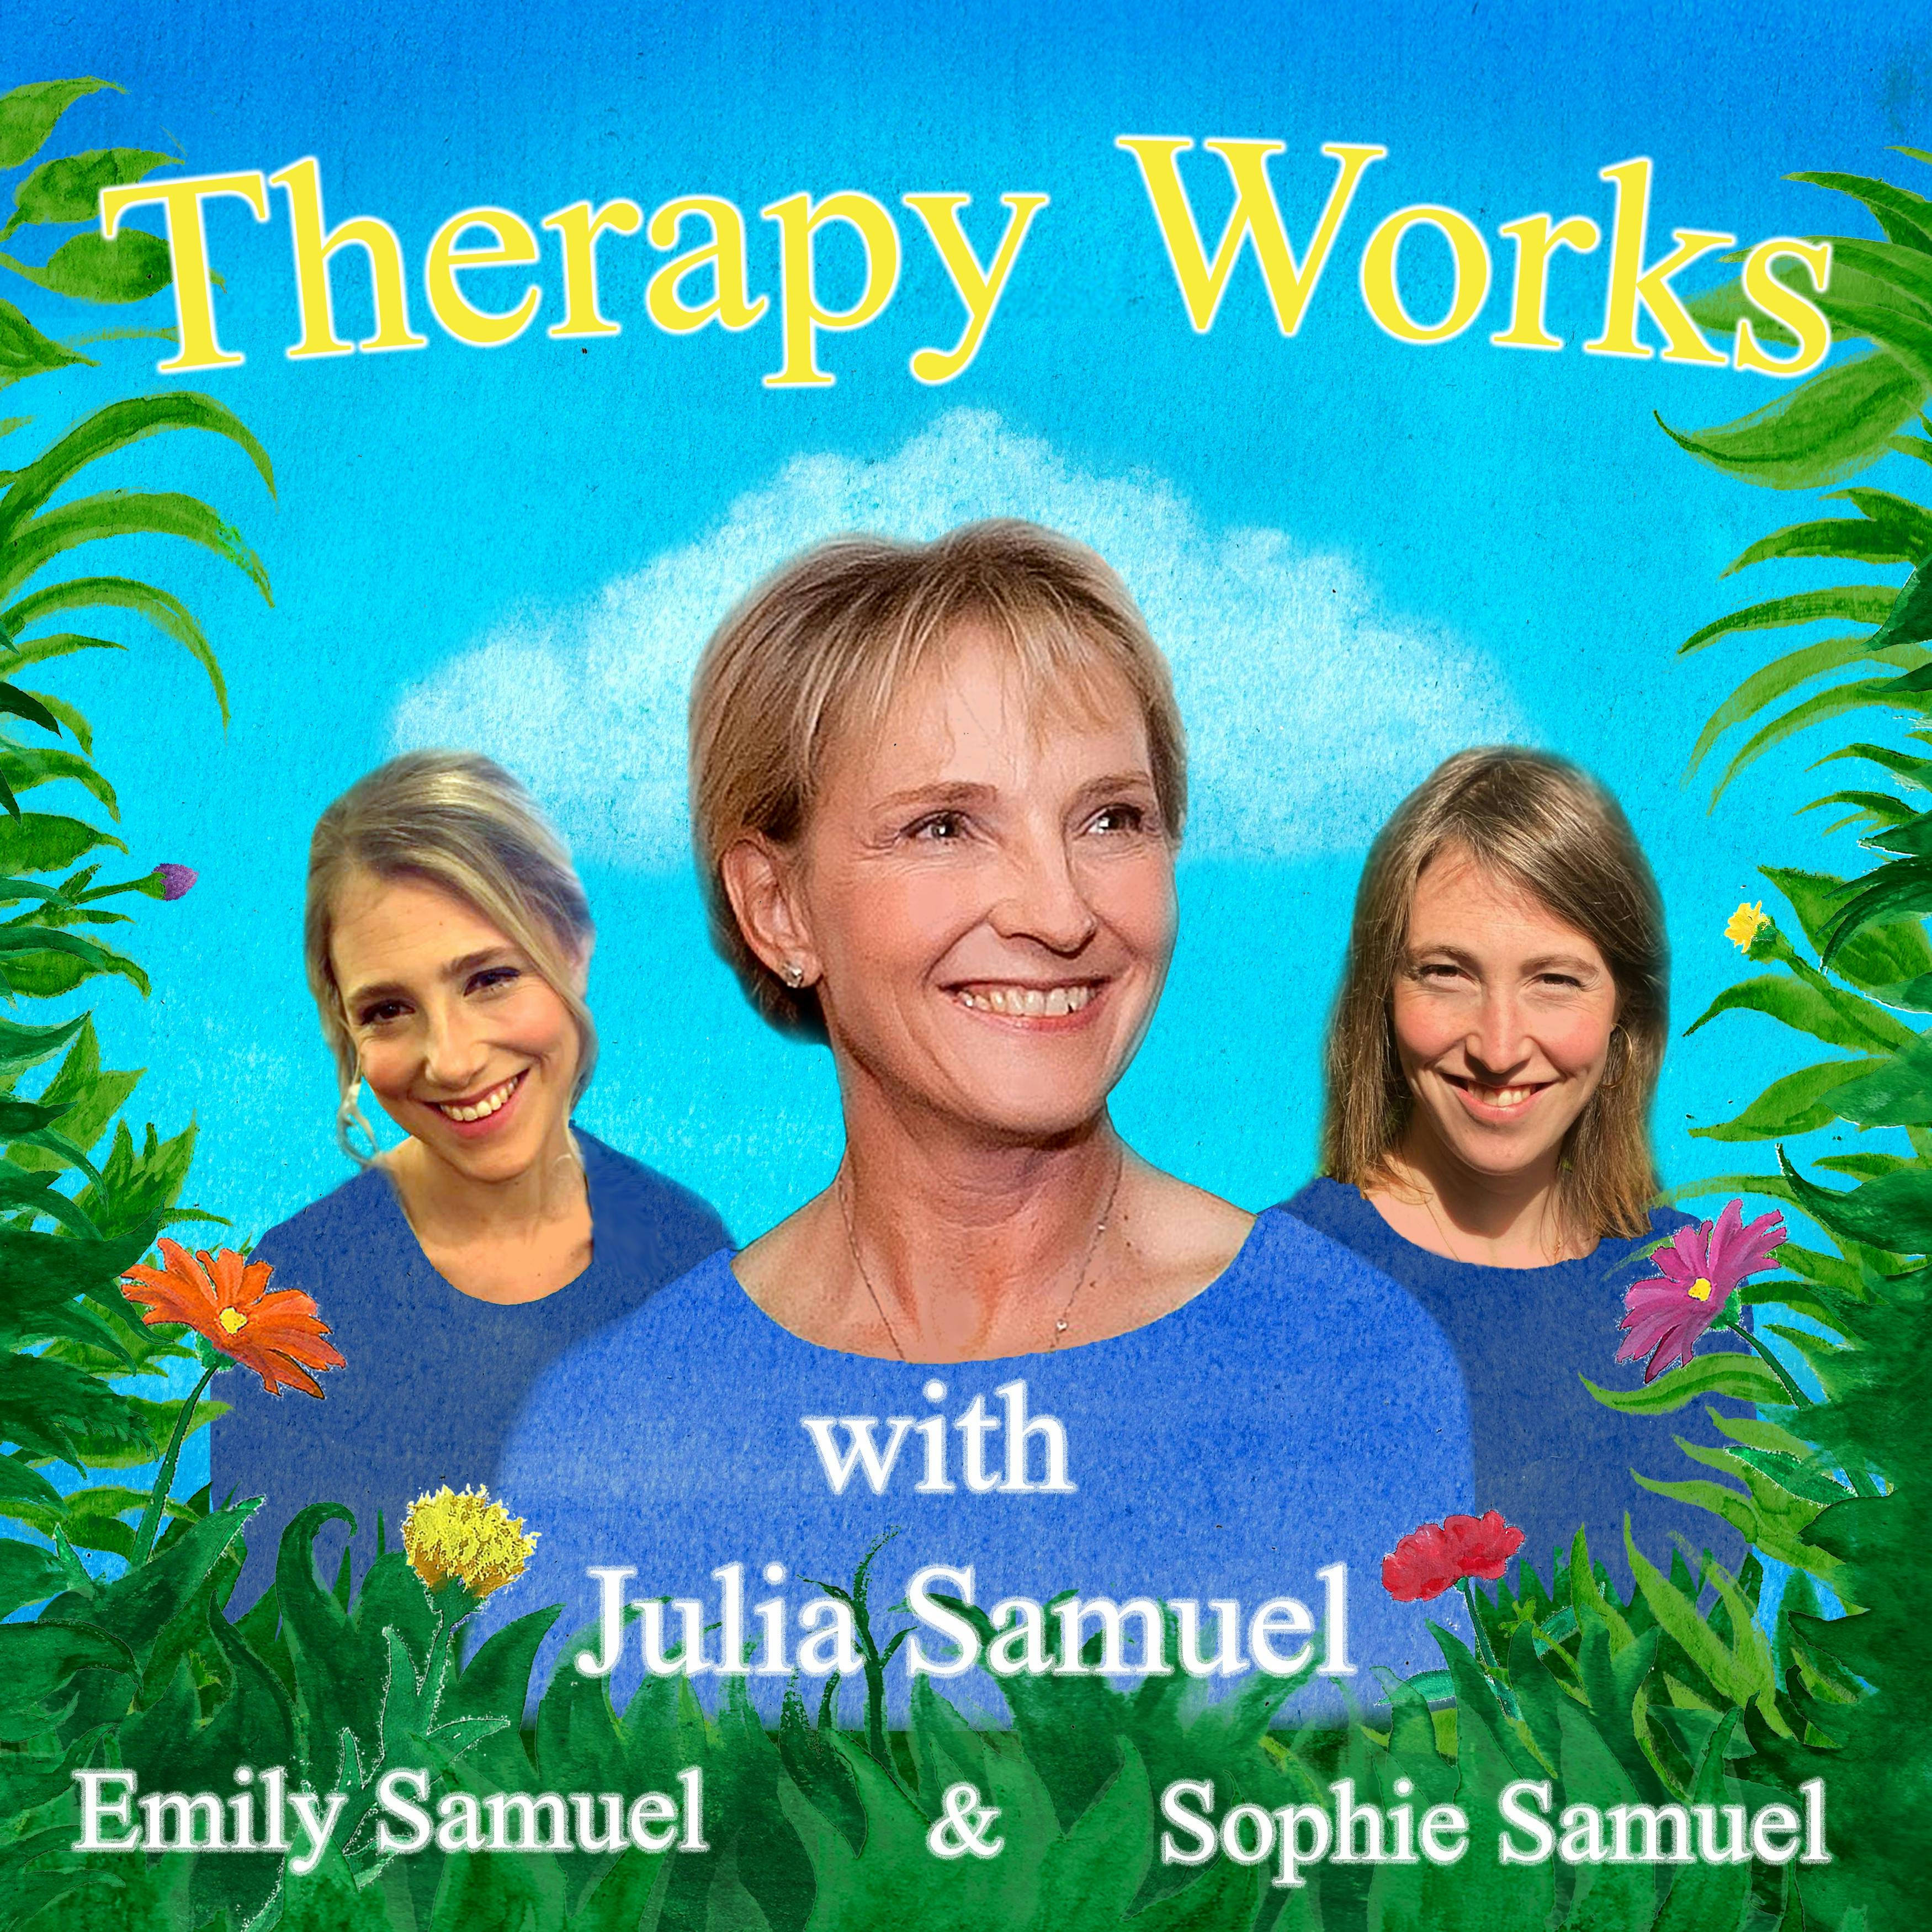 BONUS: How can therapy help me?